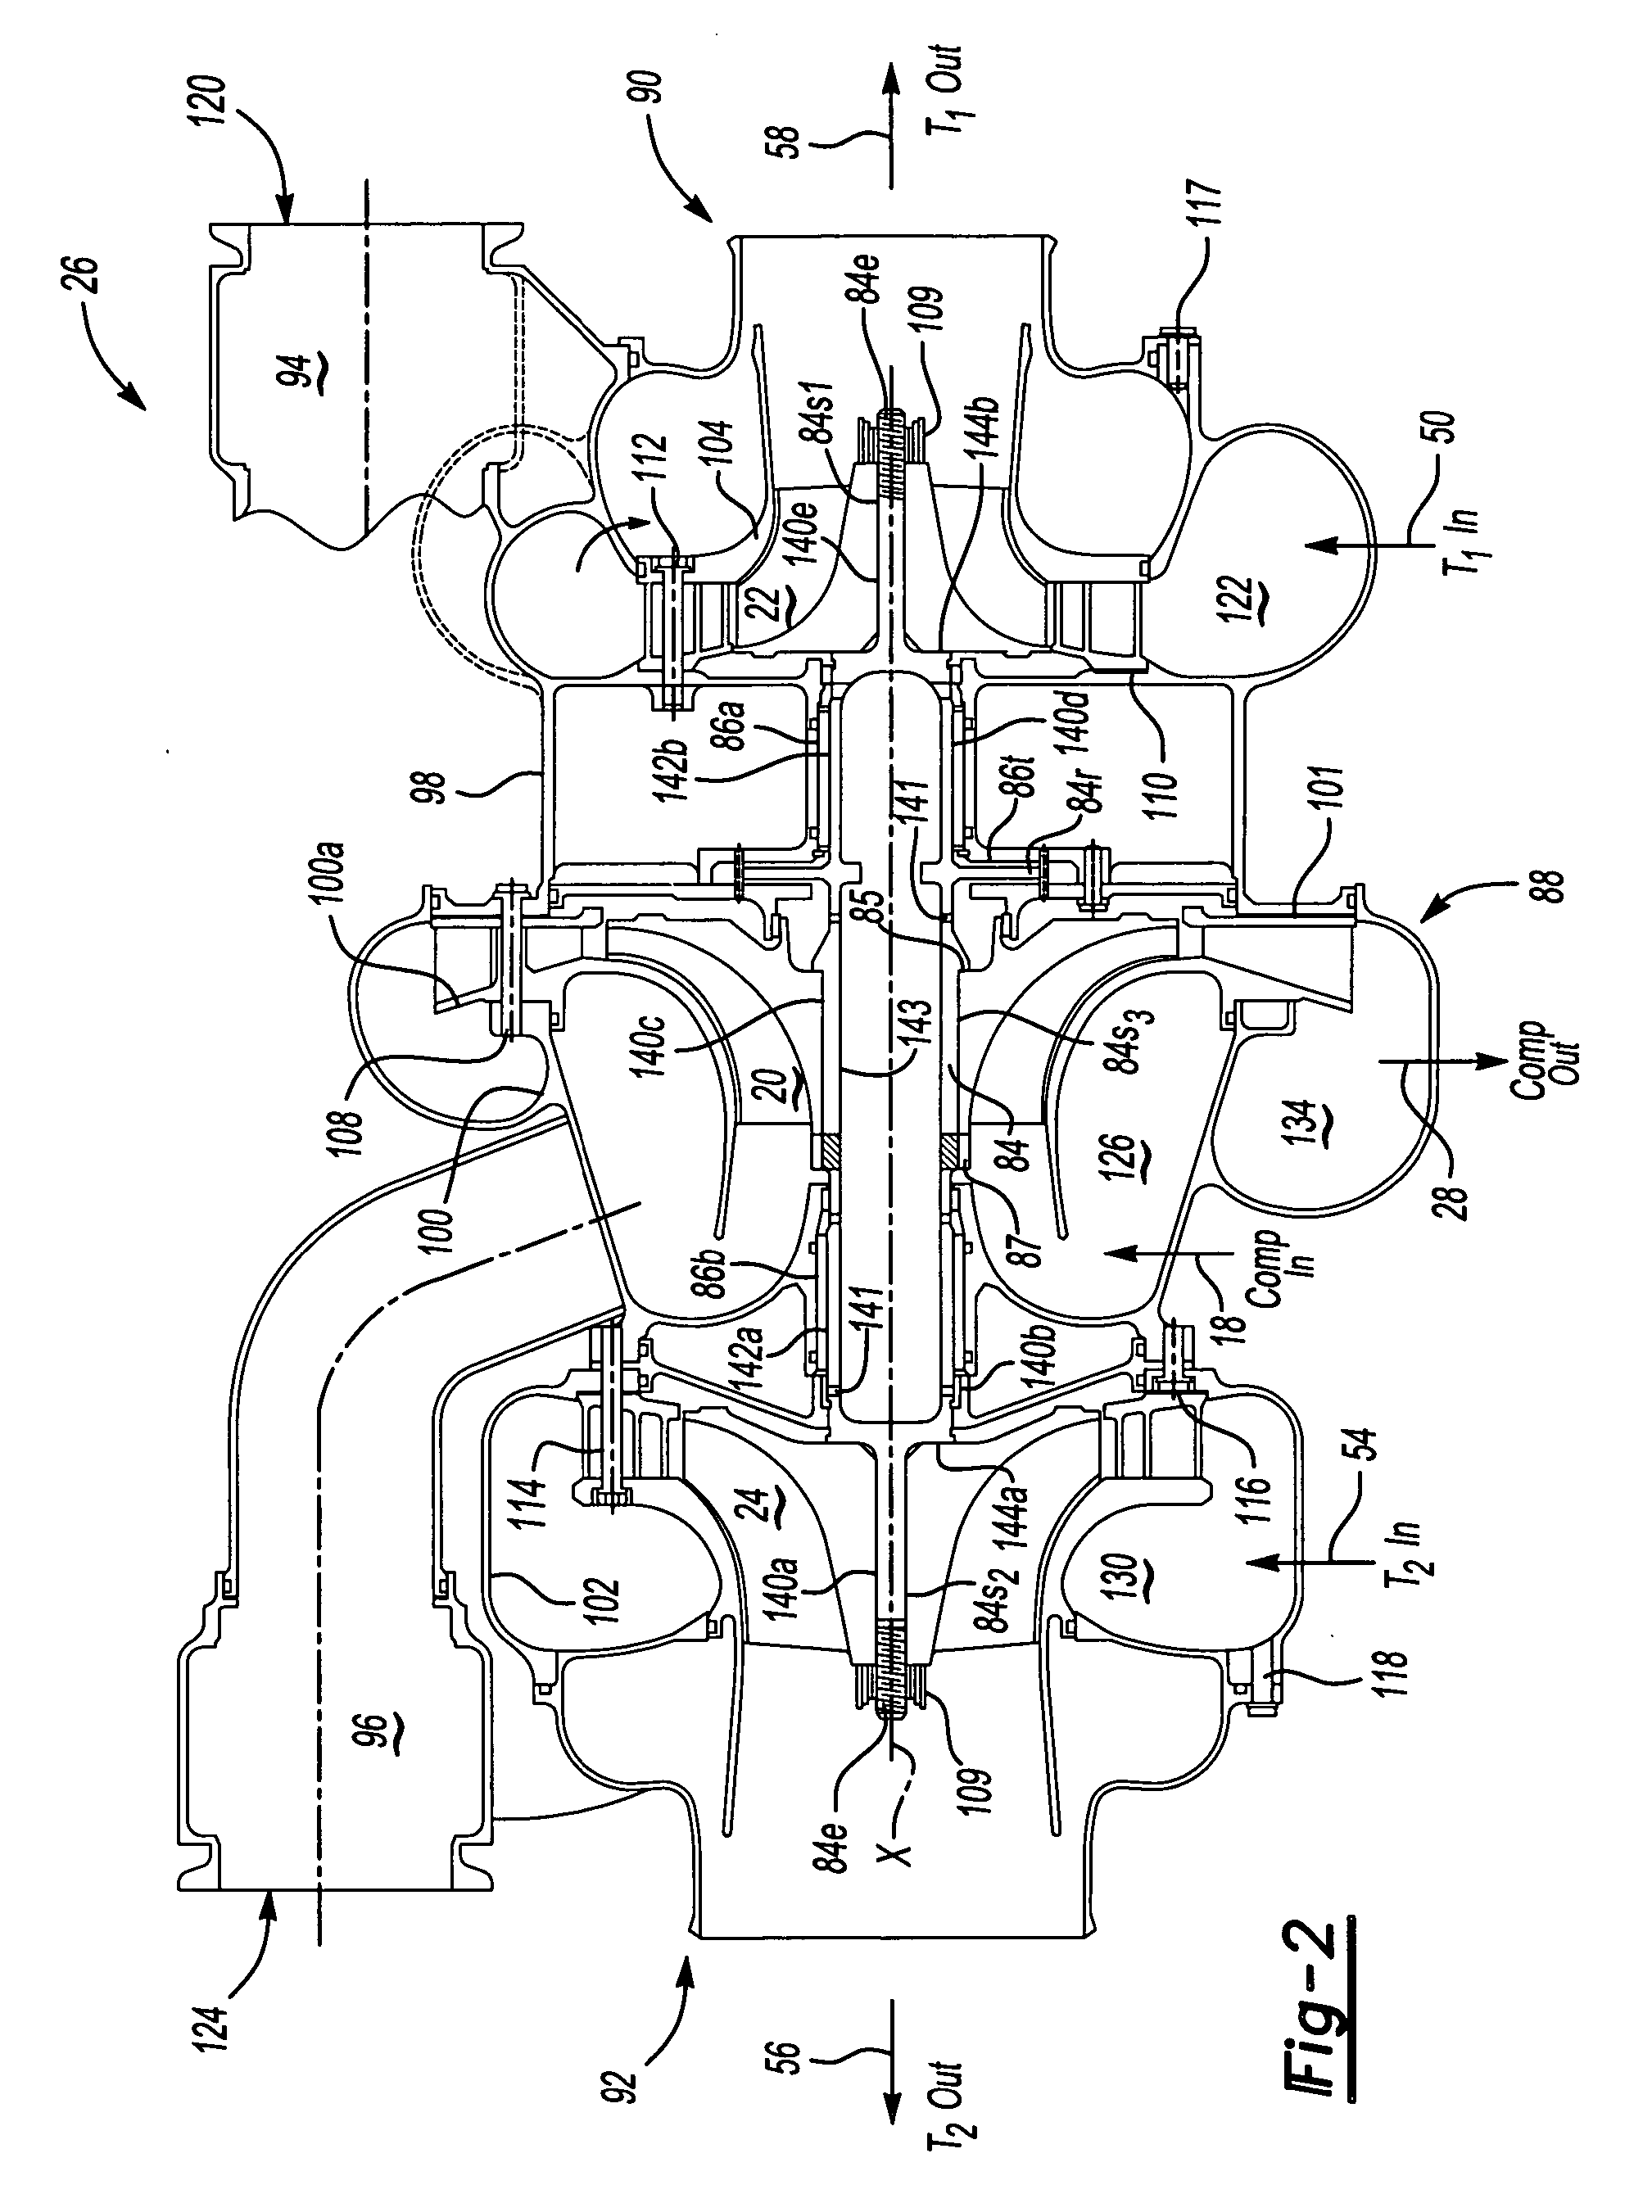 Air cycle machine integrated rotor and shaft